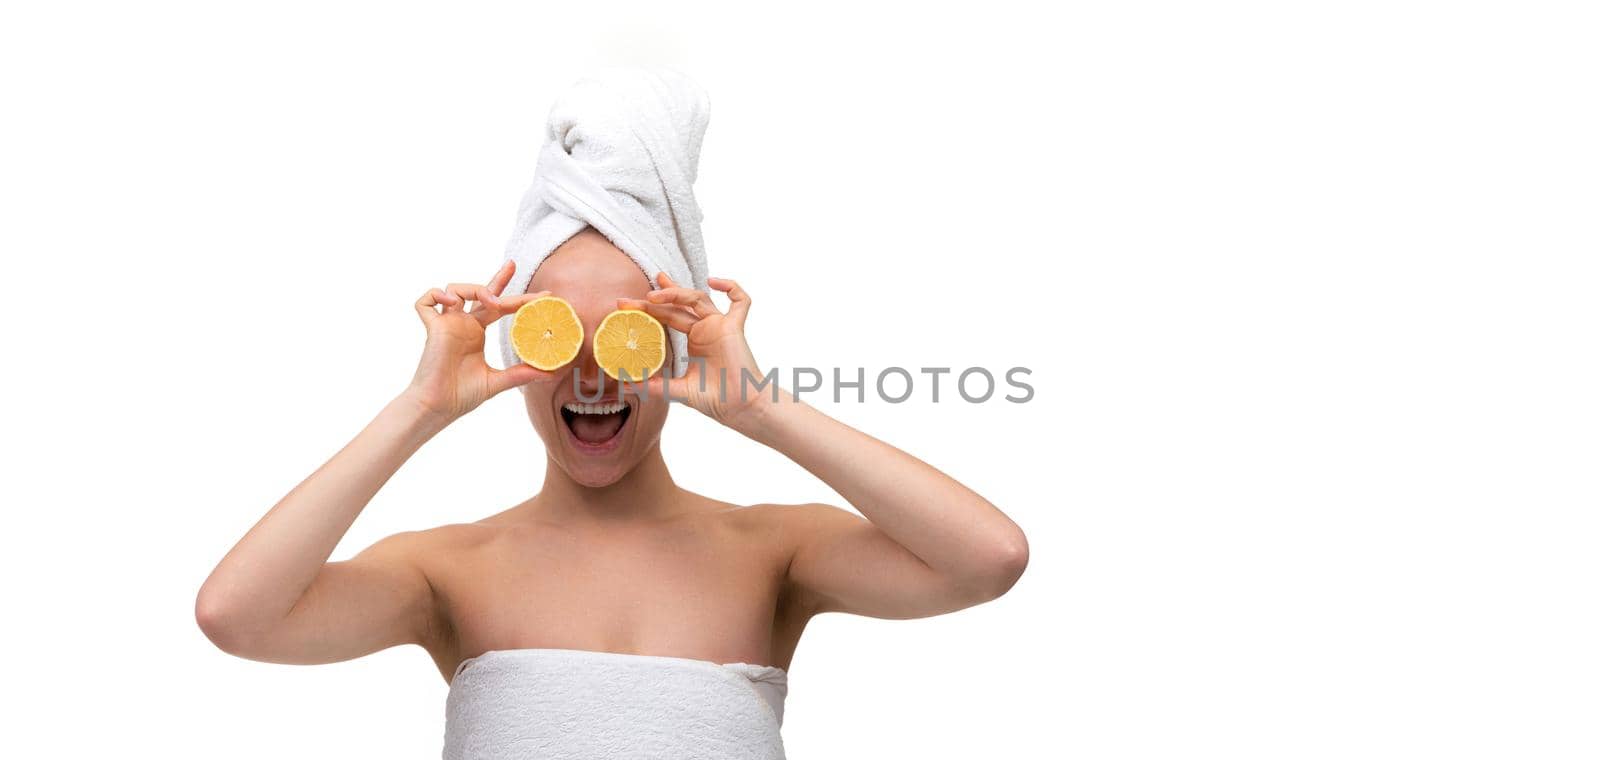 a cheerful middle-aged woman with well-groomed skin after a shower with a cut orange in her hands instead of eyes.